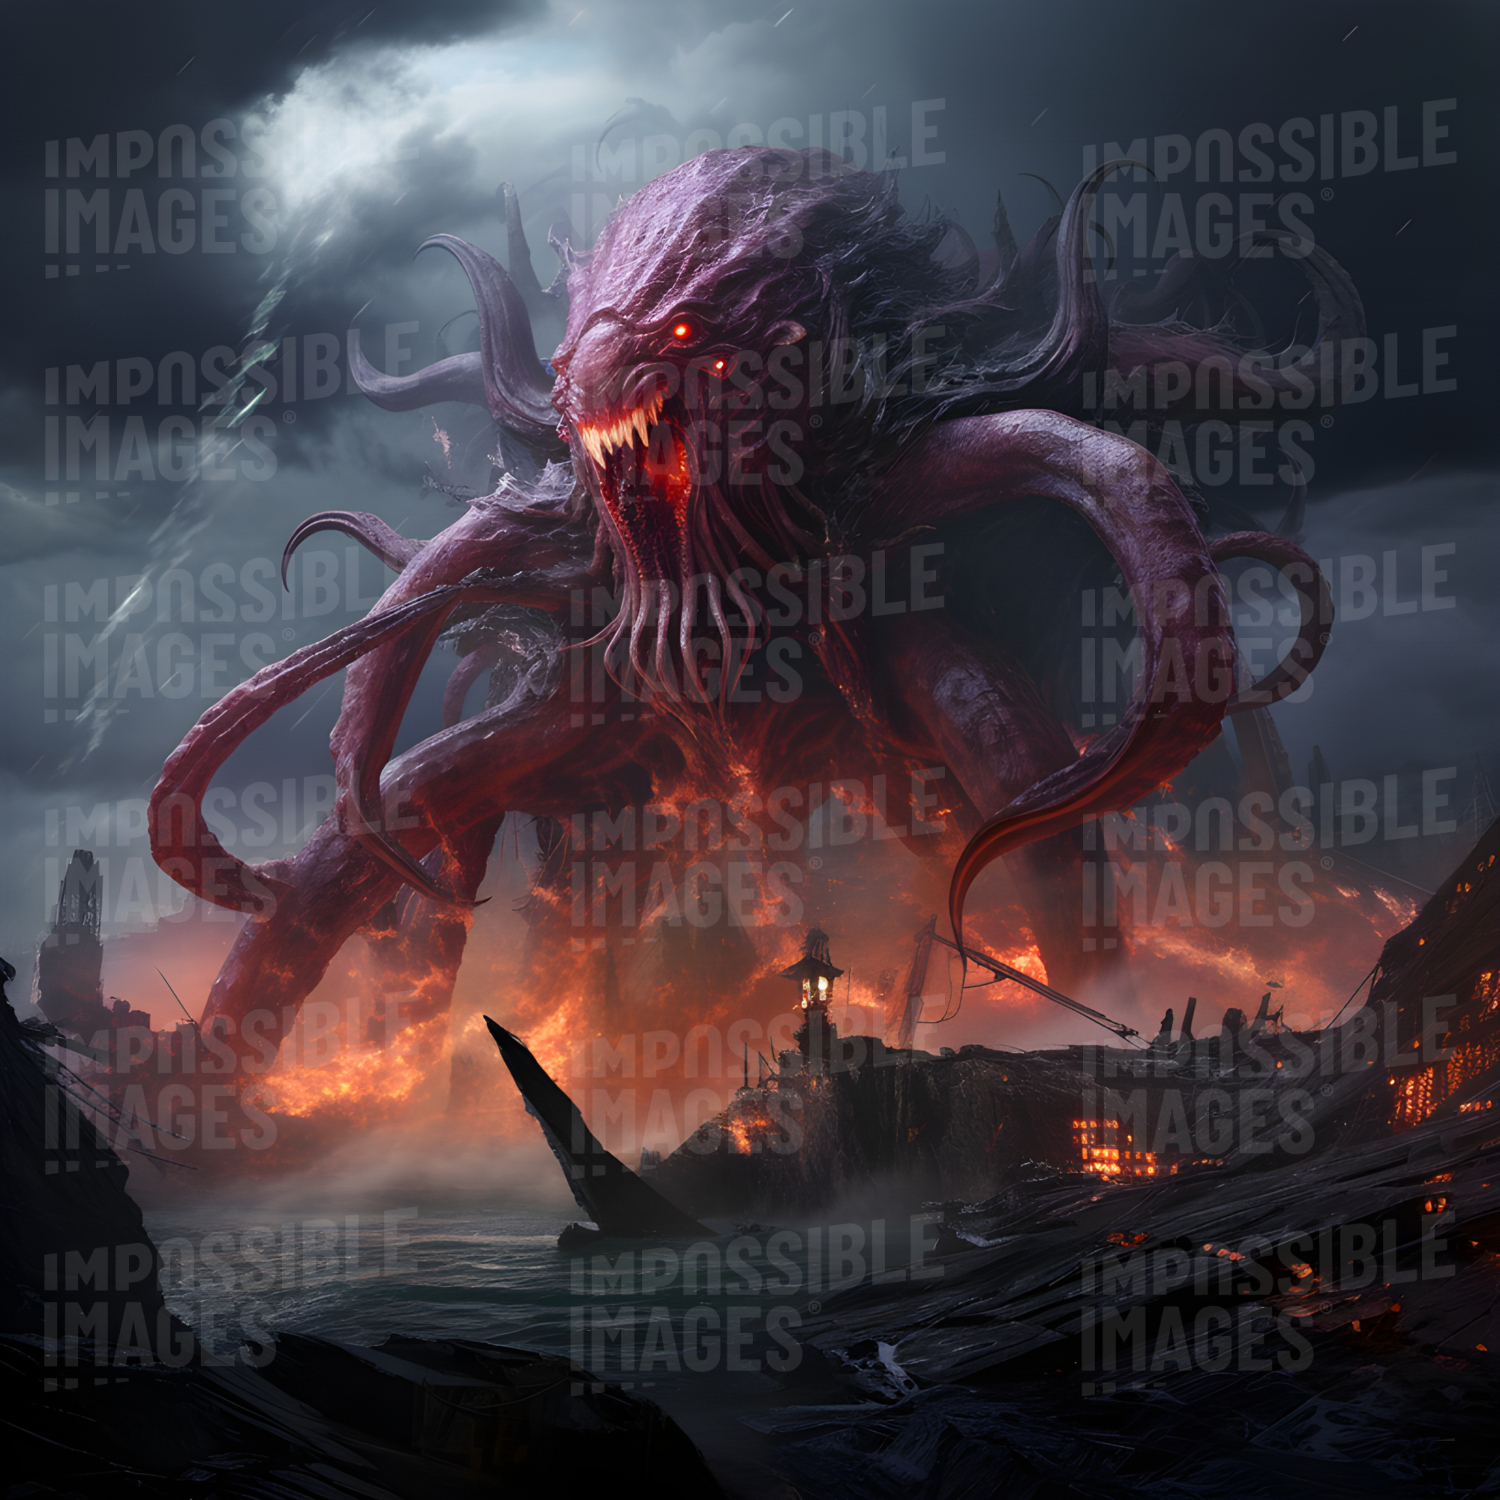 Tentacled kaiju attacking a coastal town -  Giant tentacled monster wreaks havoc on a small coastal town, destroying buildings and terrorizing the inhabitants.